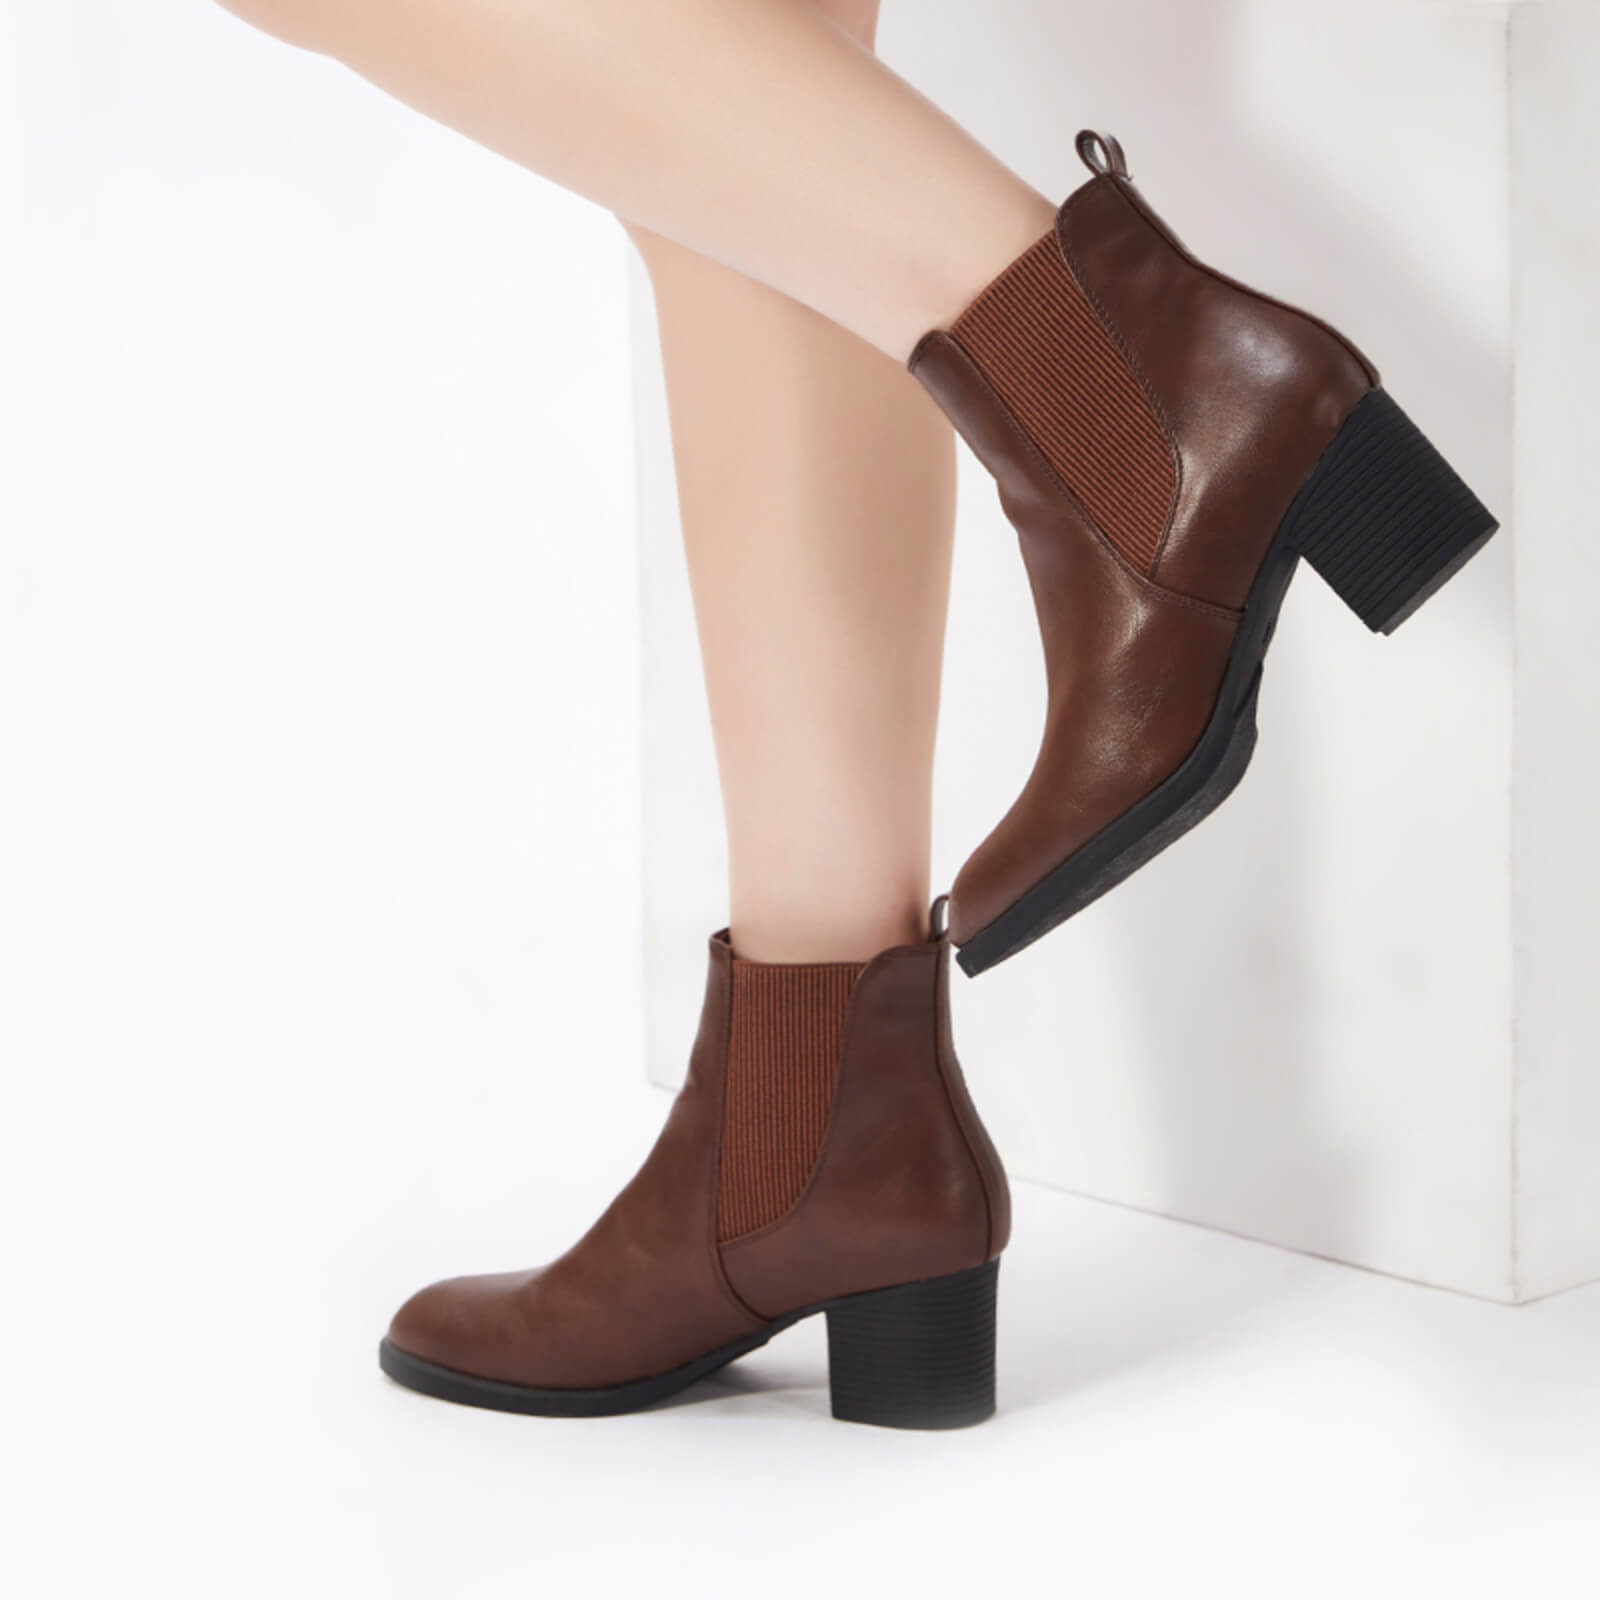 Chelsea Ankle Booties